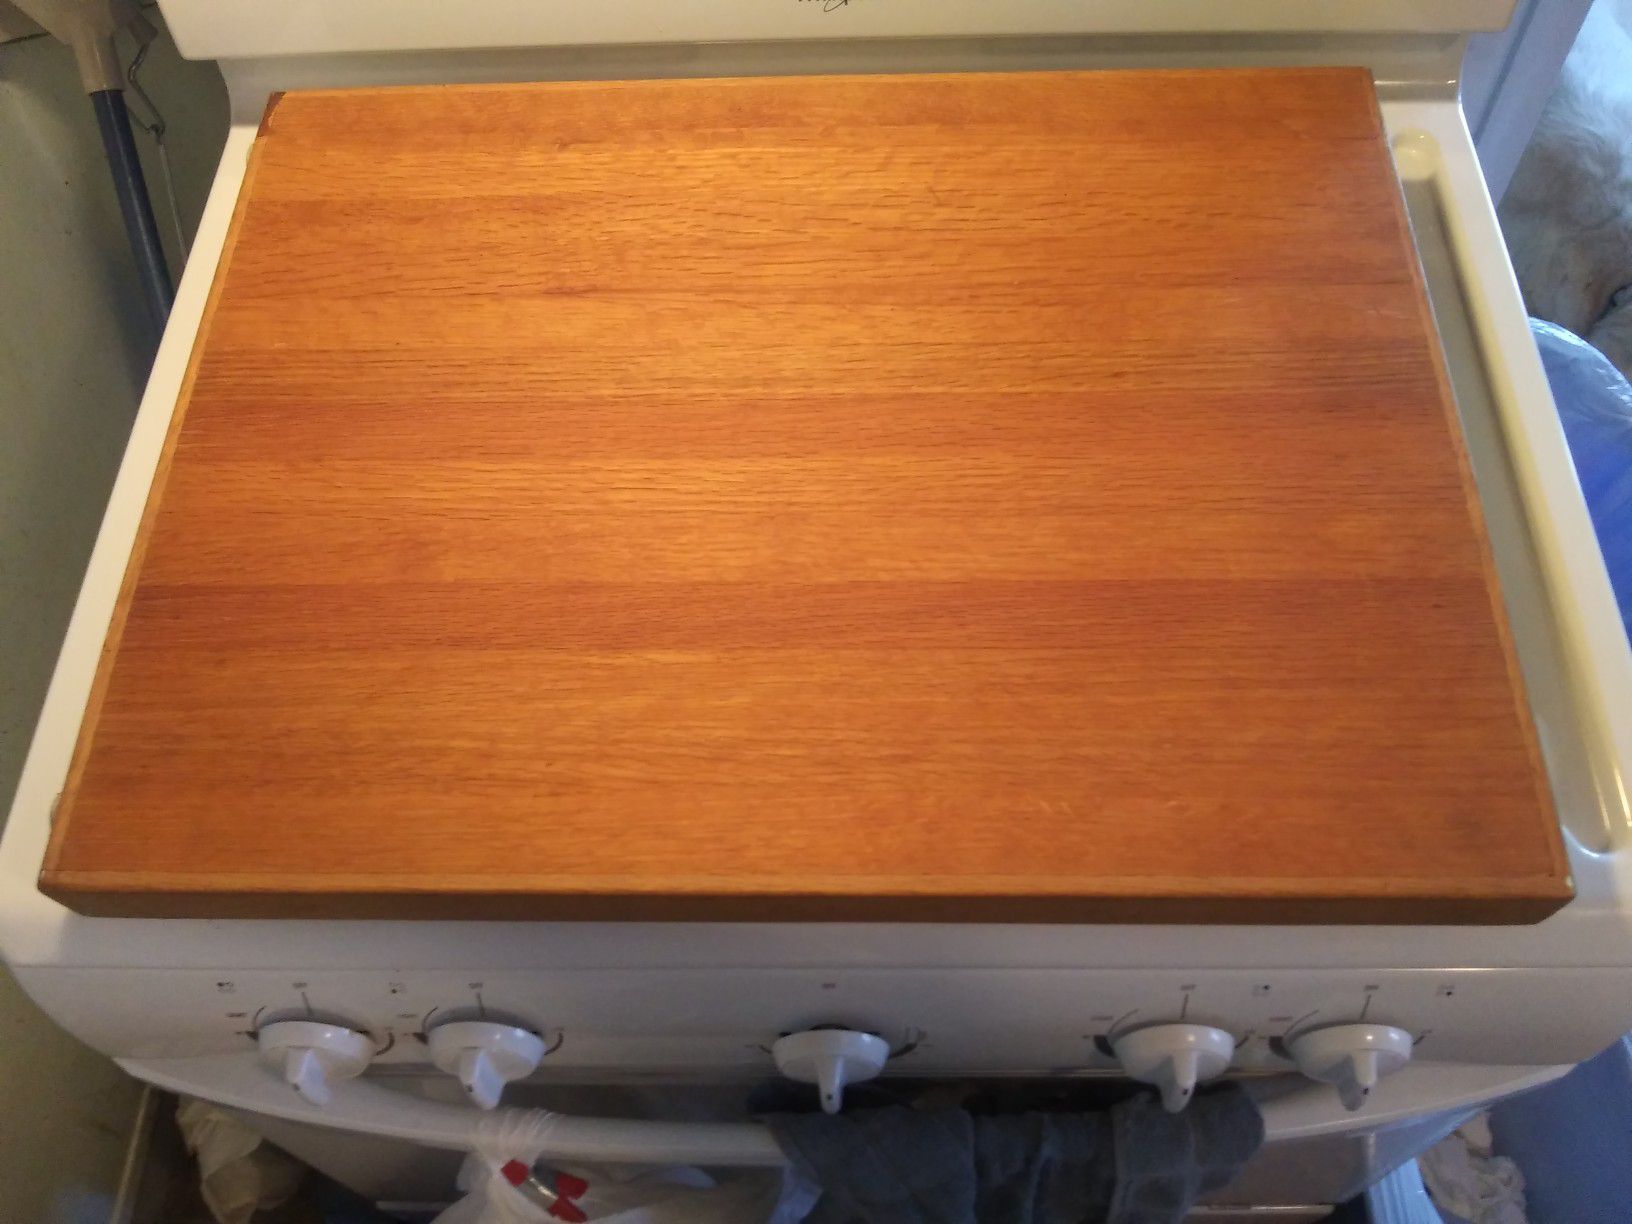 Large Solid Wood Cutting Board - Used